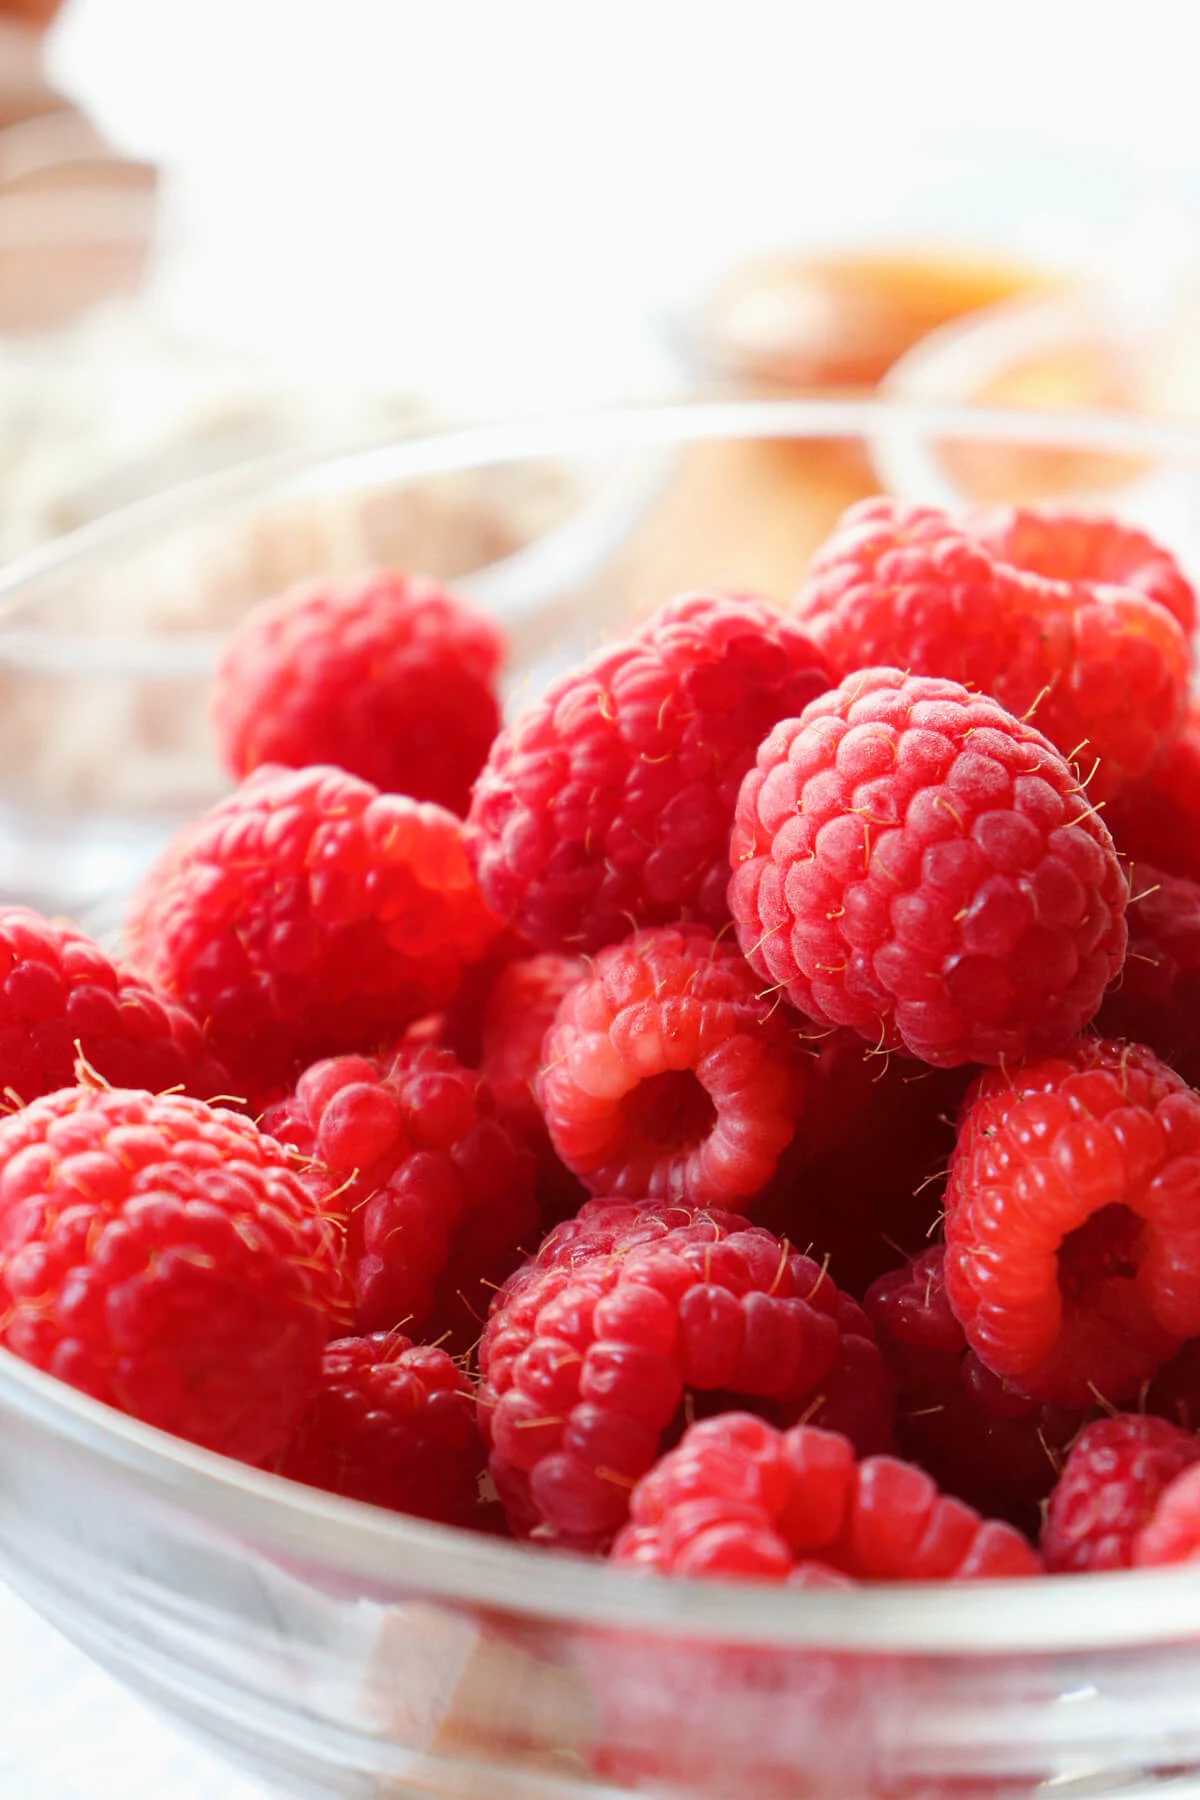 A glass bowl of raspberries with sunlight shining on them